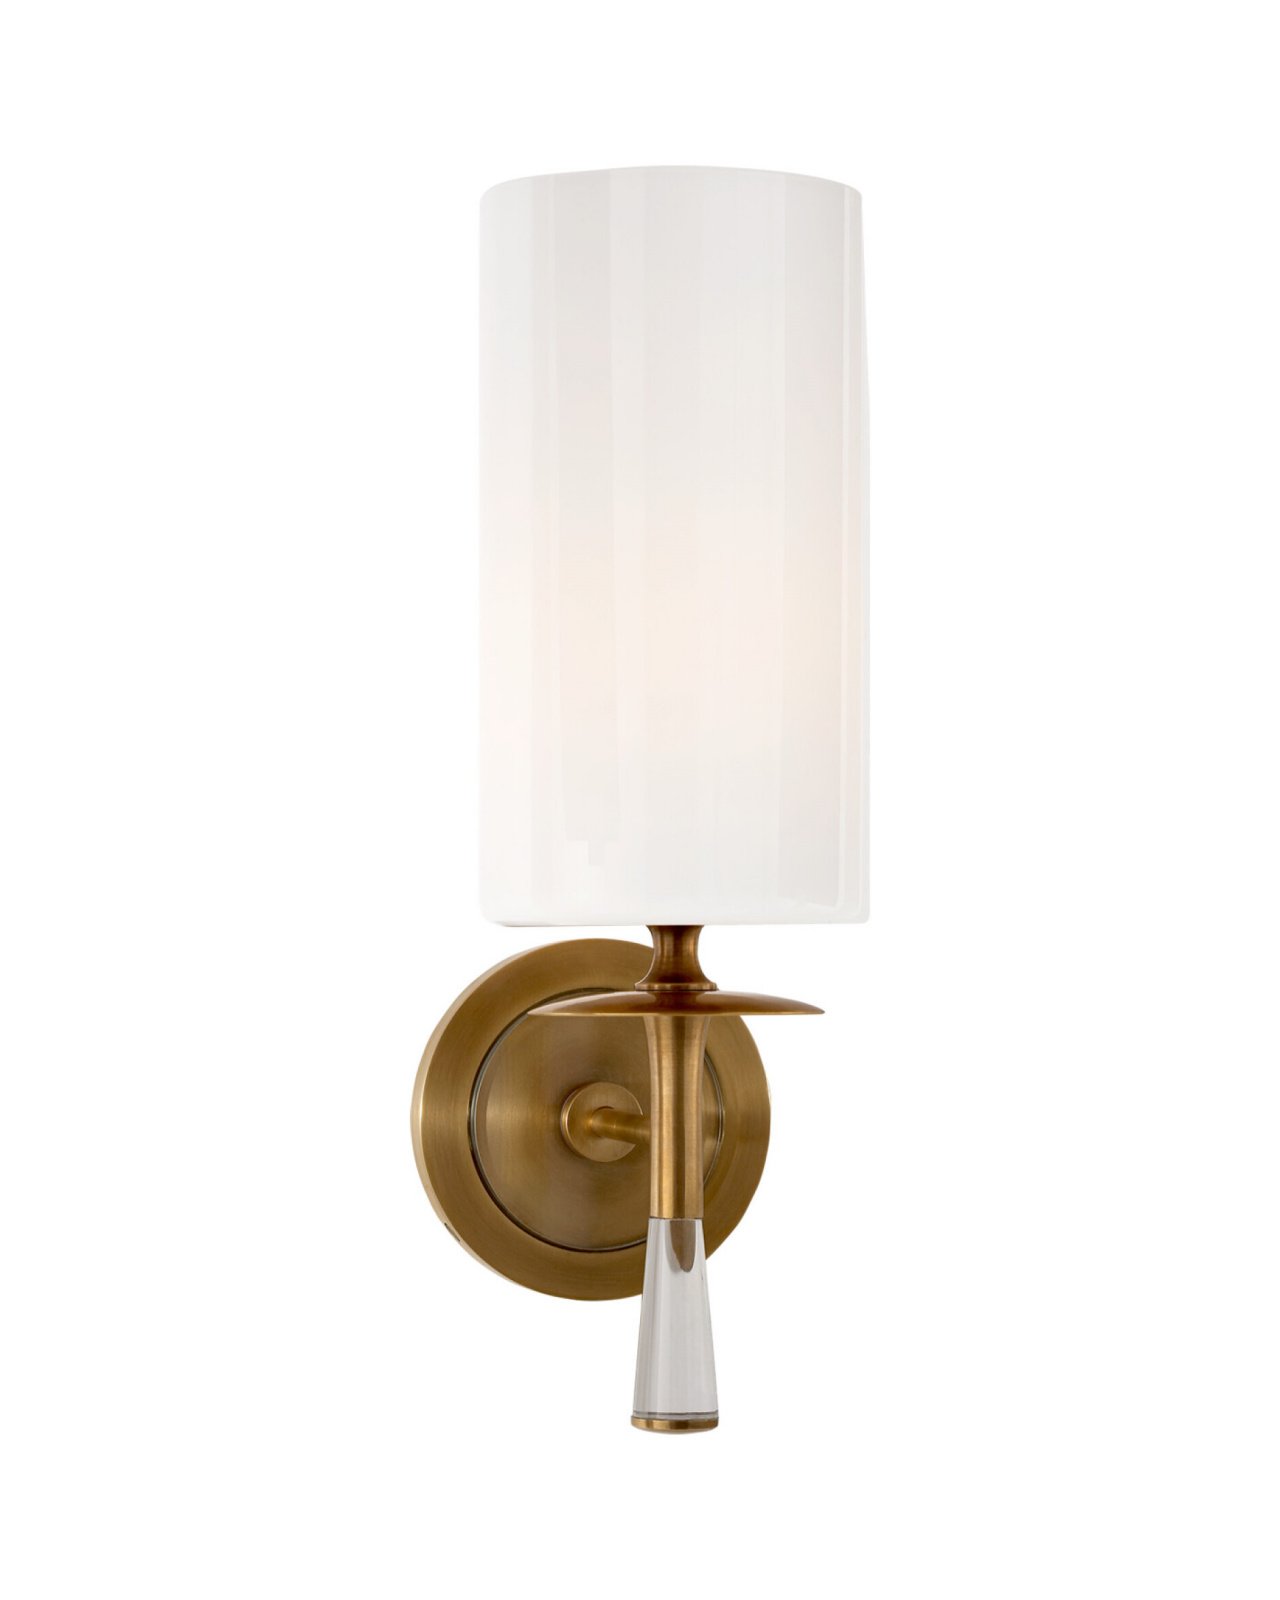 Drunmore Single Sconce Antique Brass and Crystal/White